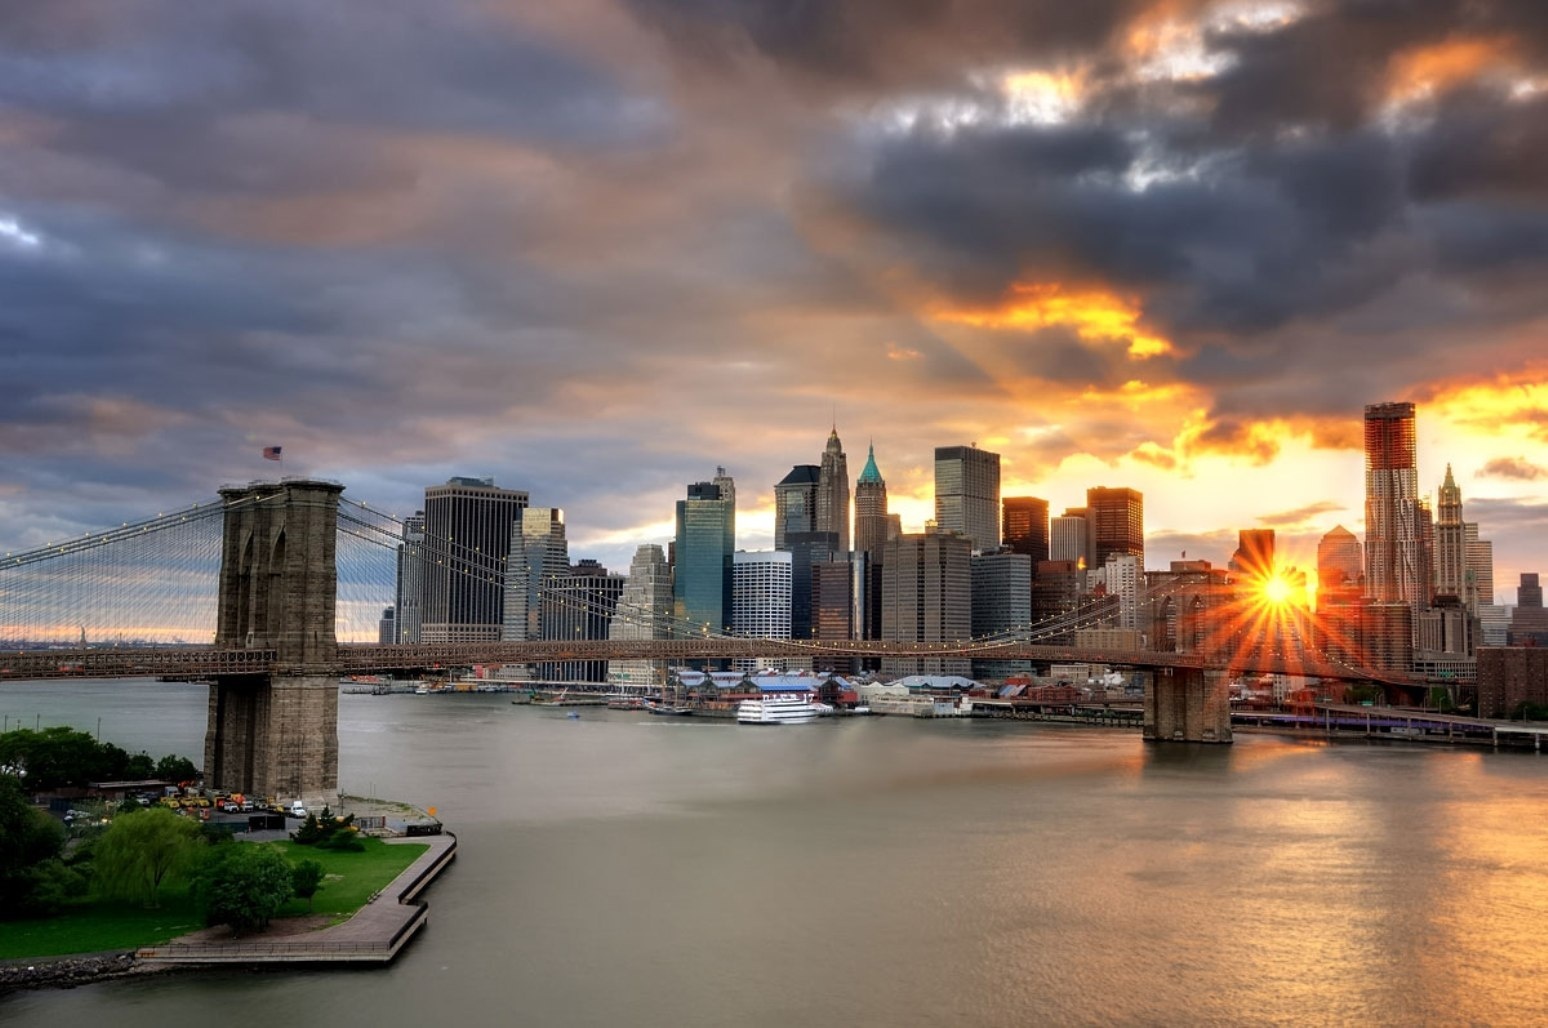 Brooklyn Bridge New Background HD Wallpapers HD Wallapers for Free